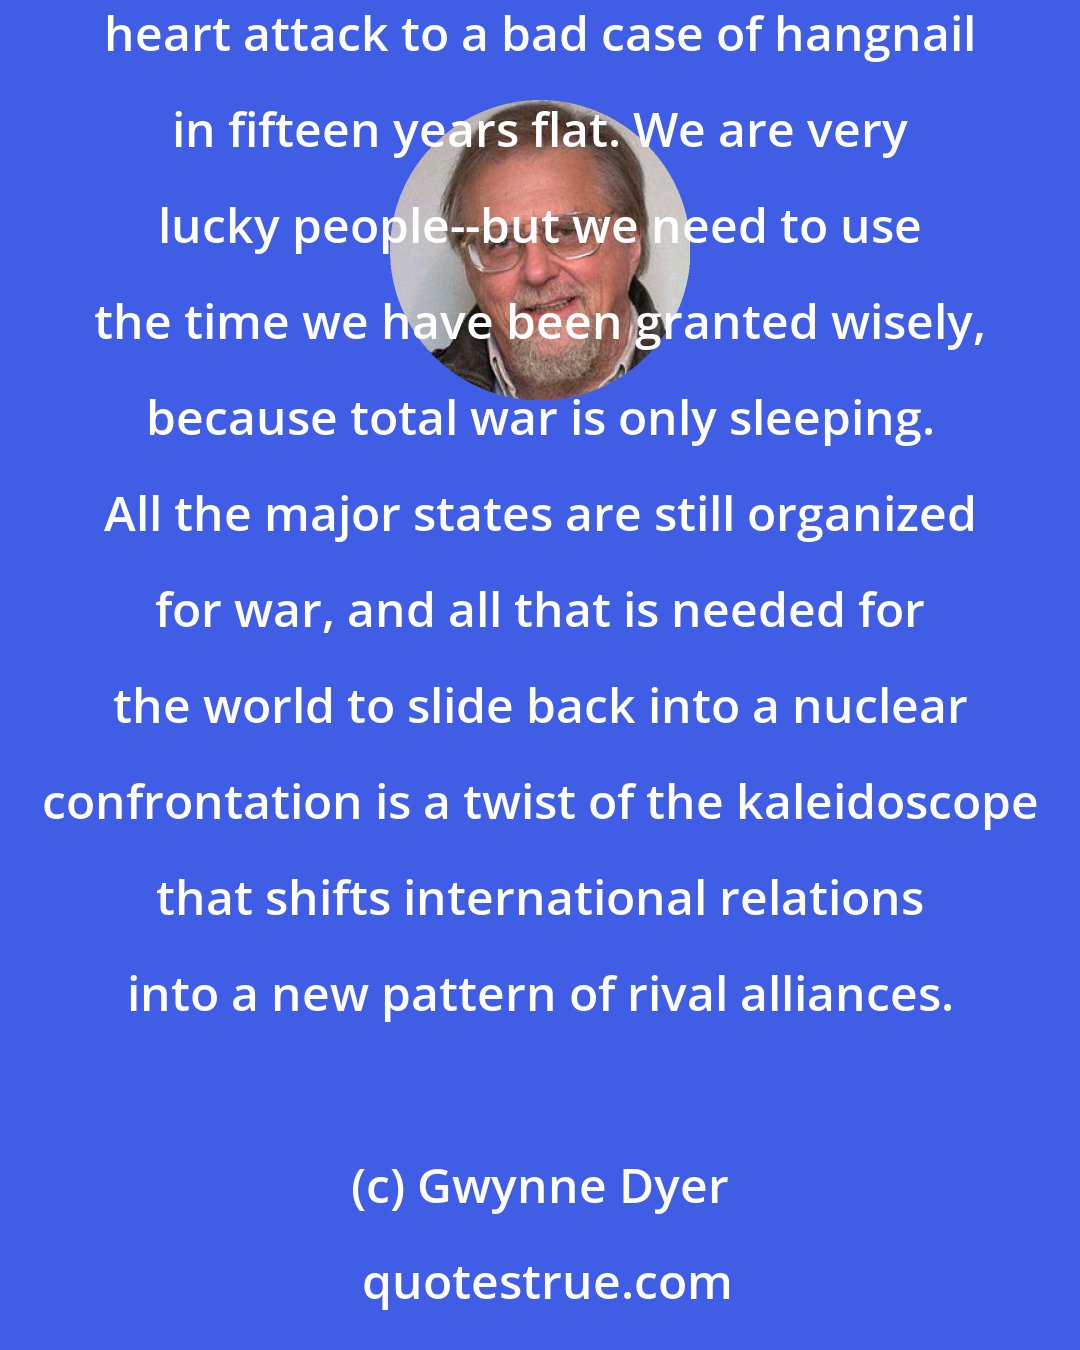 Gwynne Dyer: Now, for the moment, we are safe. The only kind of international violence that worries most people in the developed countries is terrorism: from imminent heart attack to a bad case of hangnail in fifteen years flat. We are very lucky people--but we need to use the time we have been granted wisely, because total war is only sleeping. All the major states are still organized for war, and all that is needed for the world to slide back into a nuclear confrontation is a twist of the kaleidoscope that shifts international relations into a new pattern of rival alliances.